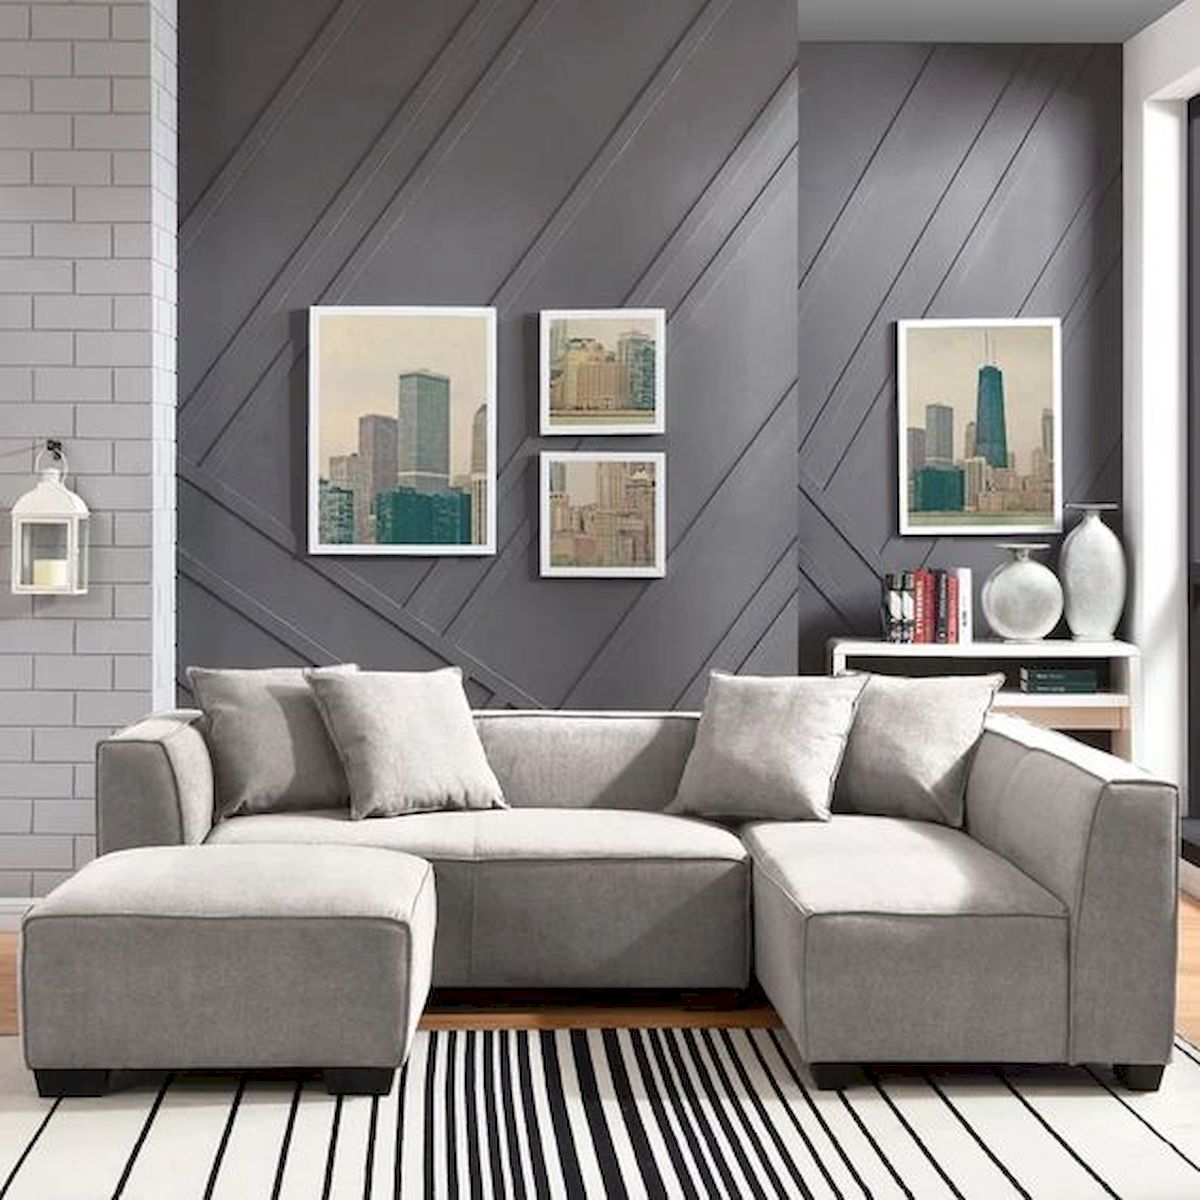 Decorative Wall Decor: Add Style And Personality To Your Home